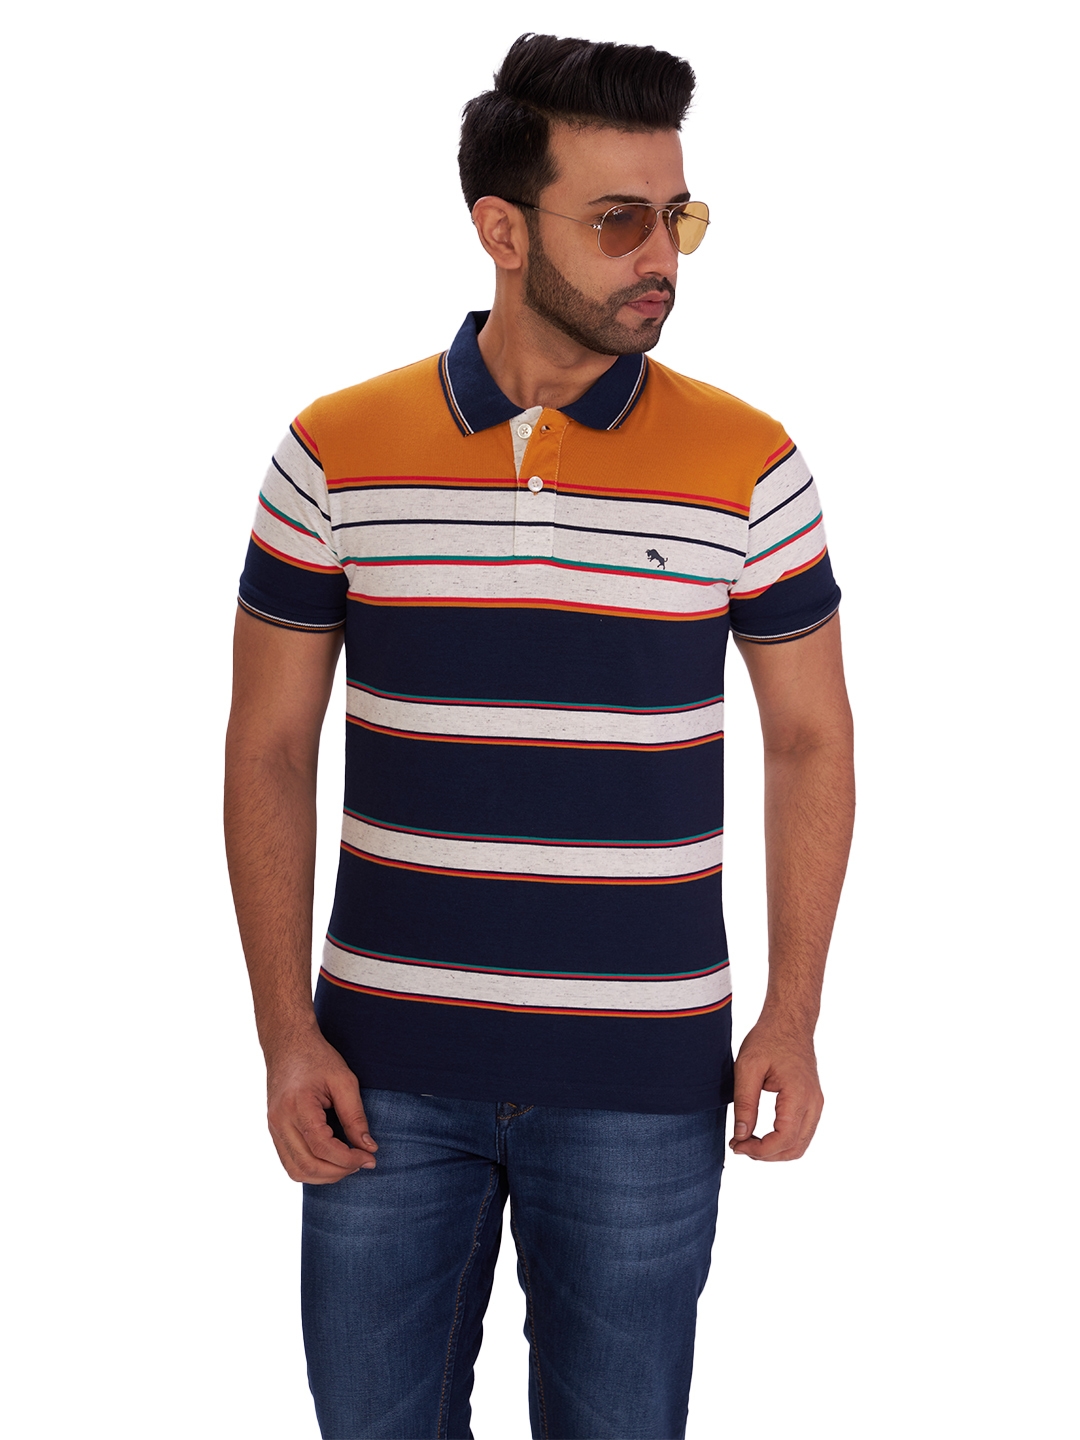 D'cot by Donear | D'cot by Donear Mens Multi Polycotton T-Shirts